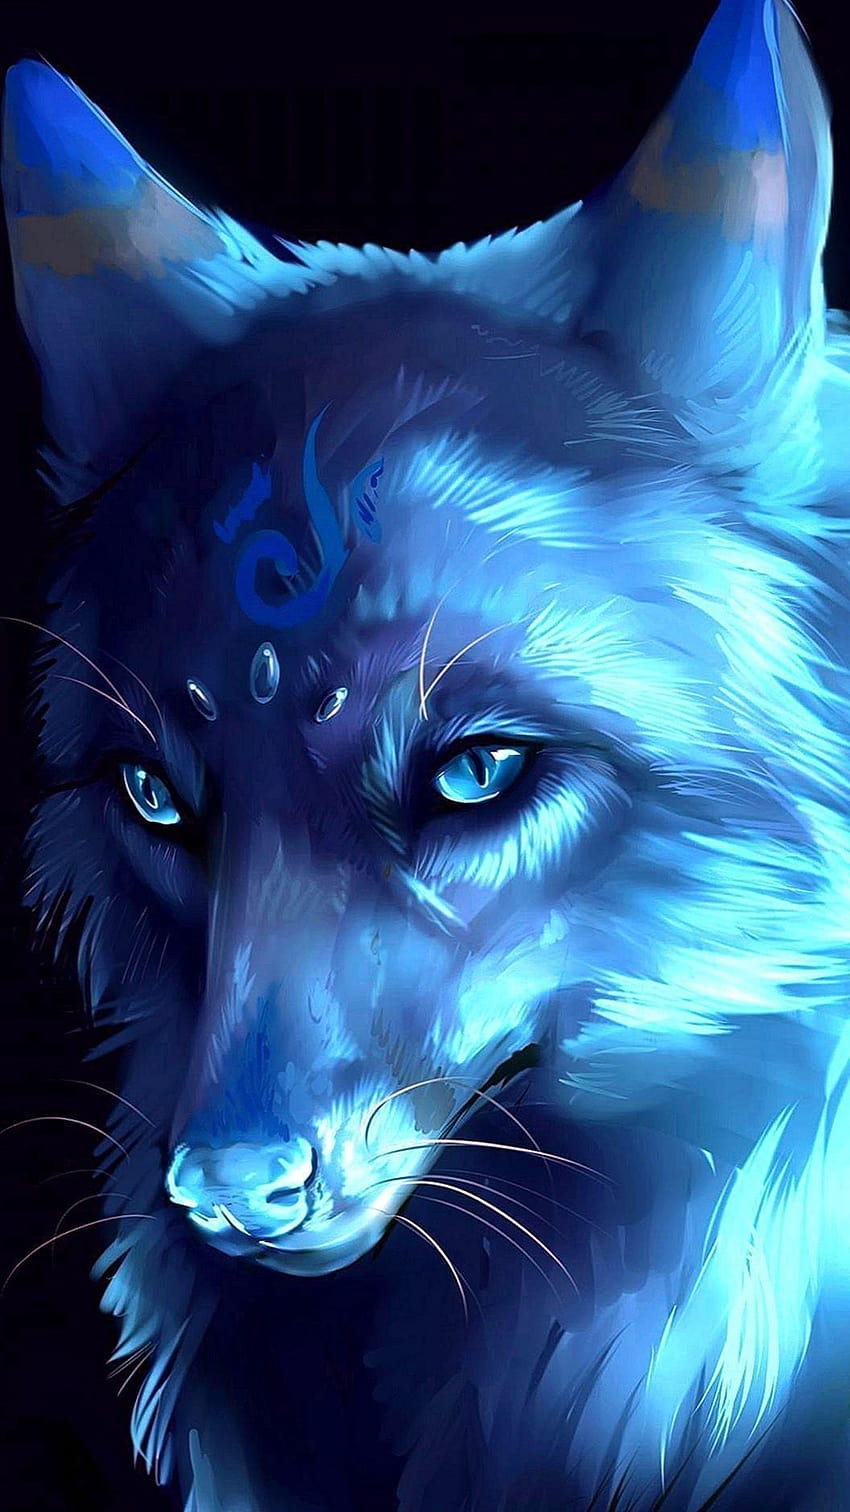 Pin by Alikiah on Awesome animal art mostly wolves  Fox illustration  art Fox art Creature artwork